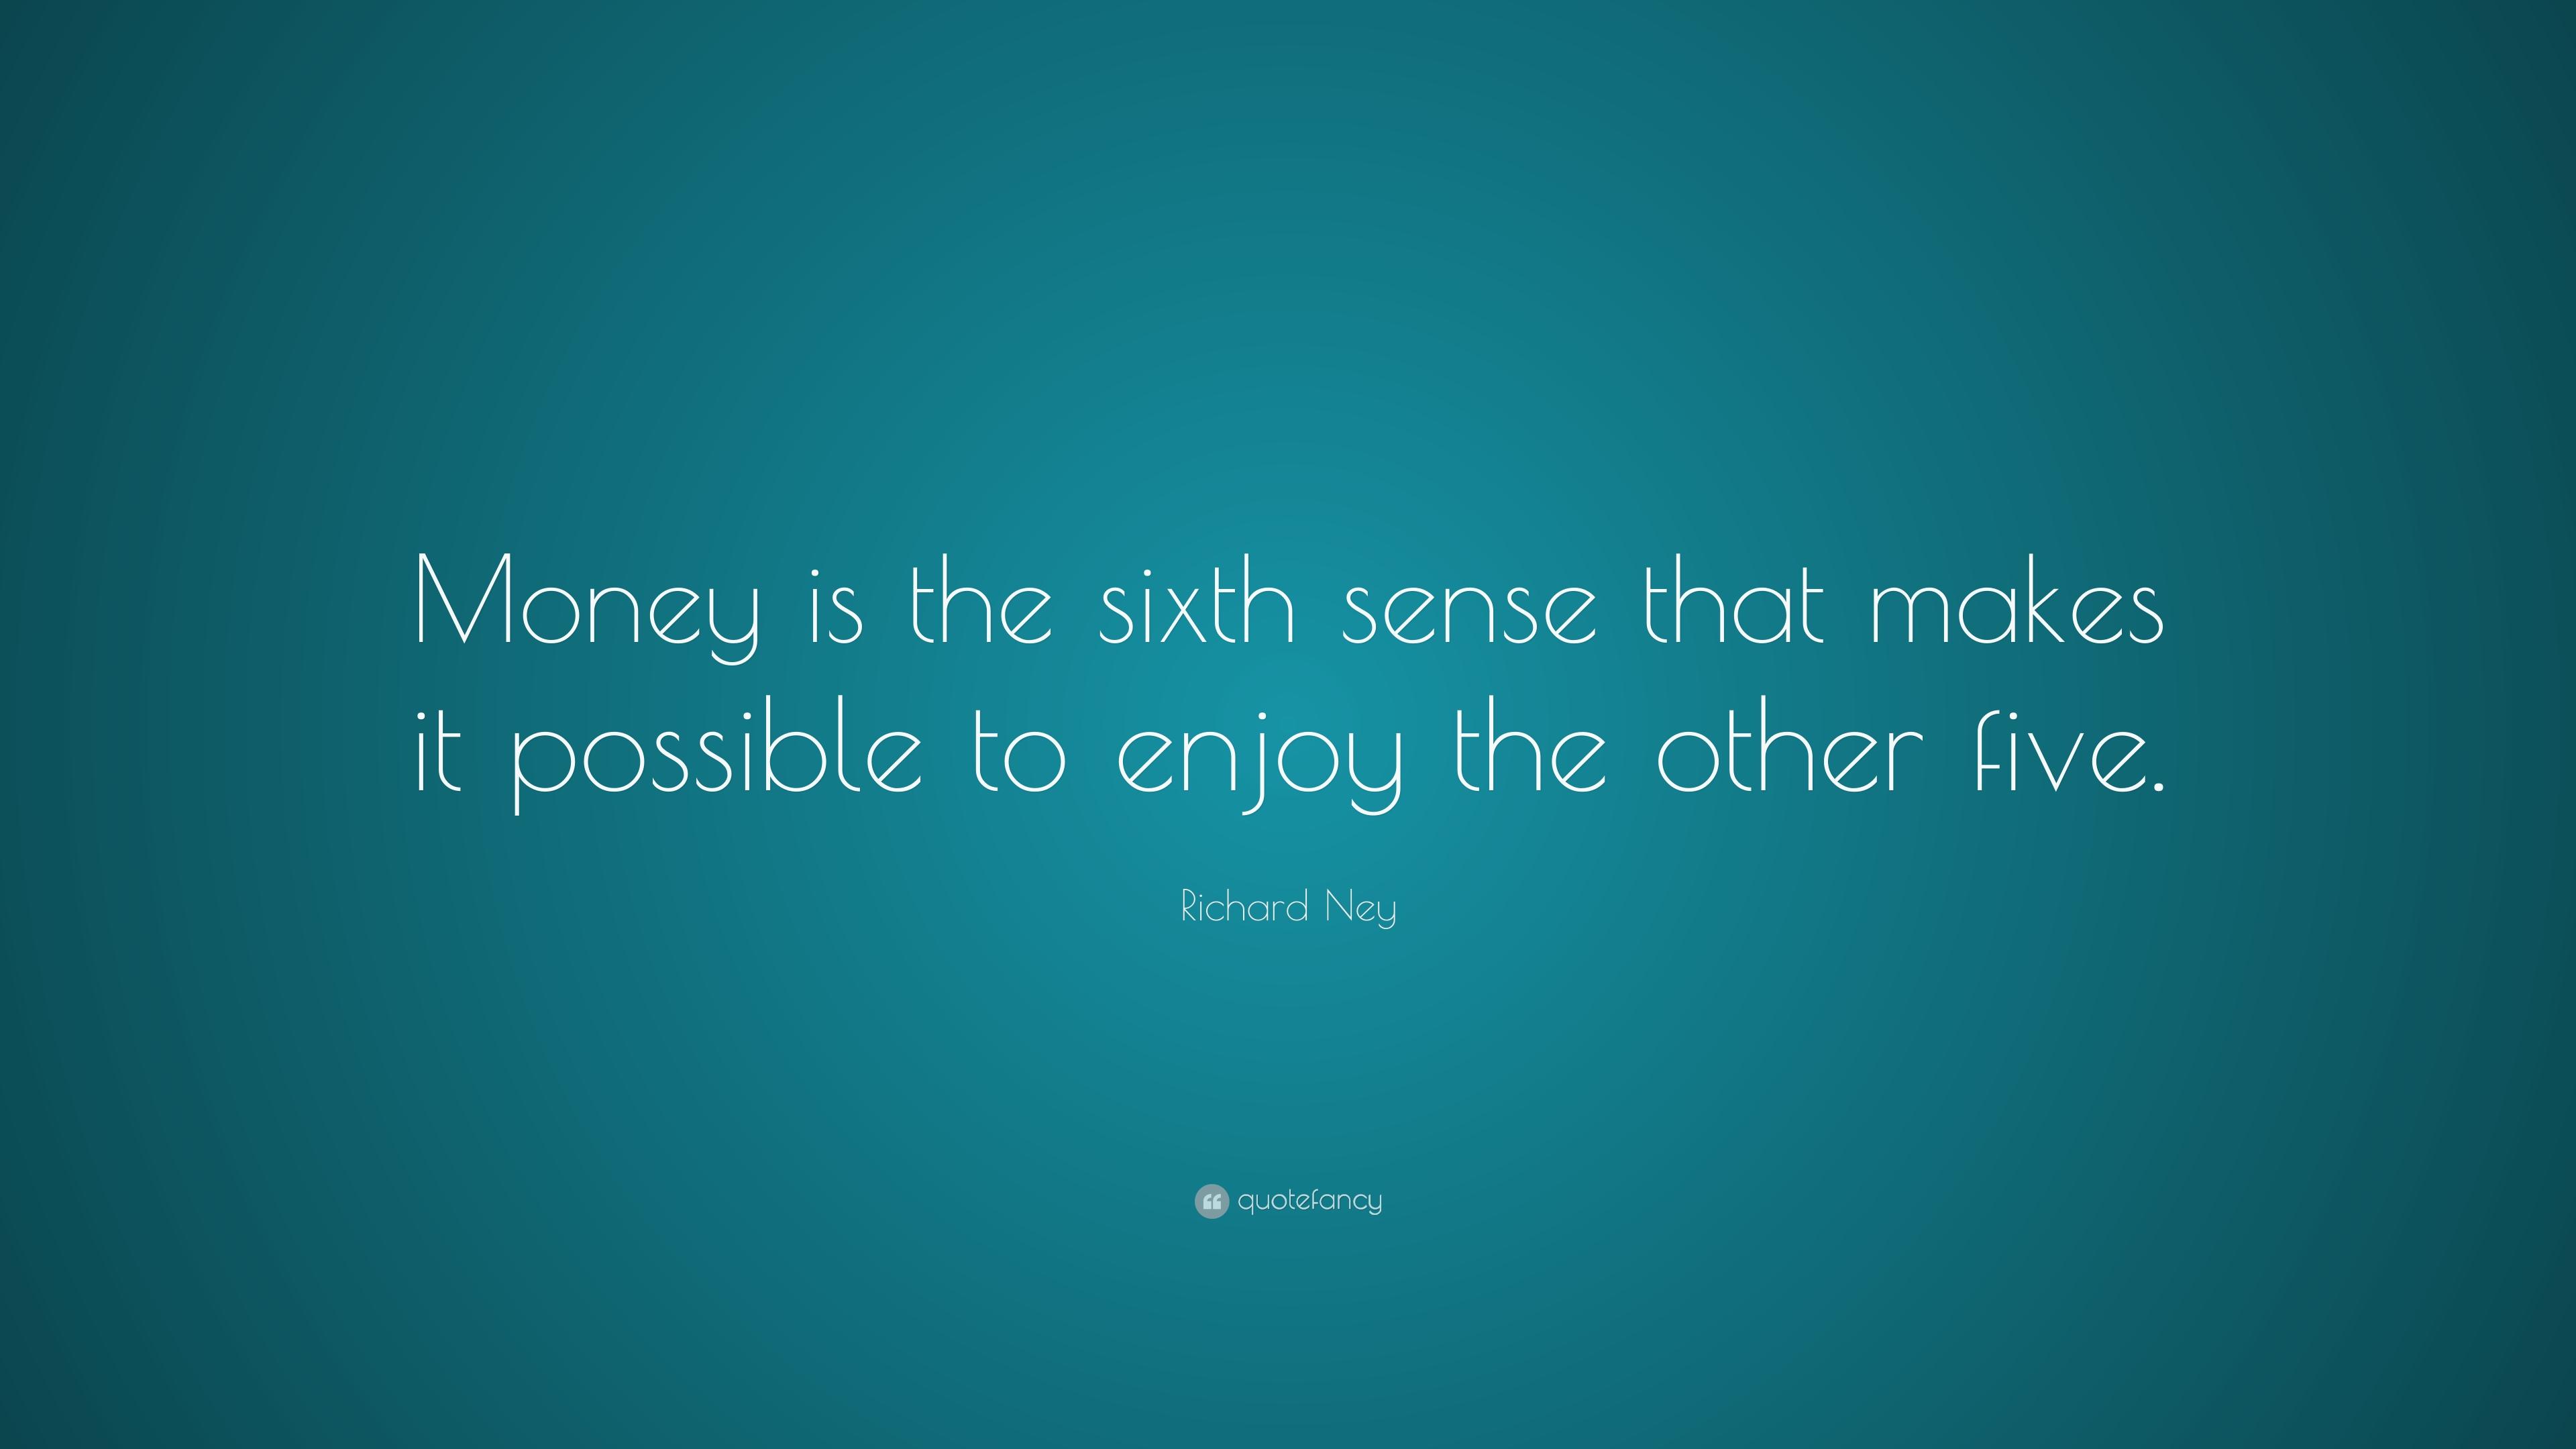 Richard Ney Quote: “Money is the sixth sense that makes it possible